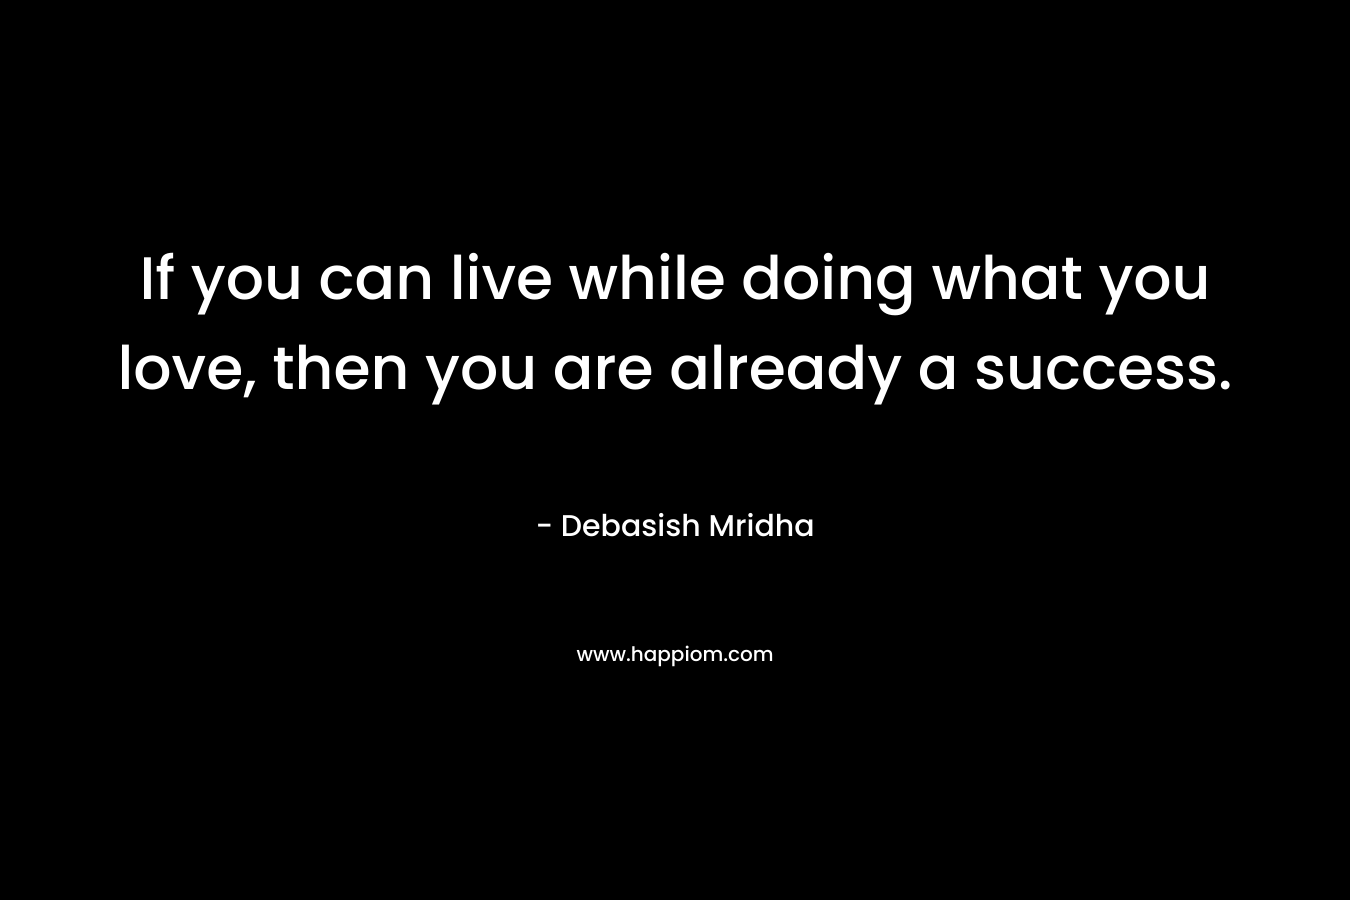 If you can live while doing what you love, then you are already a success.